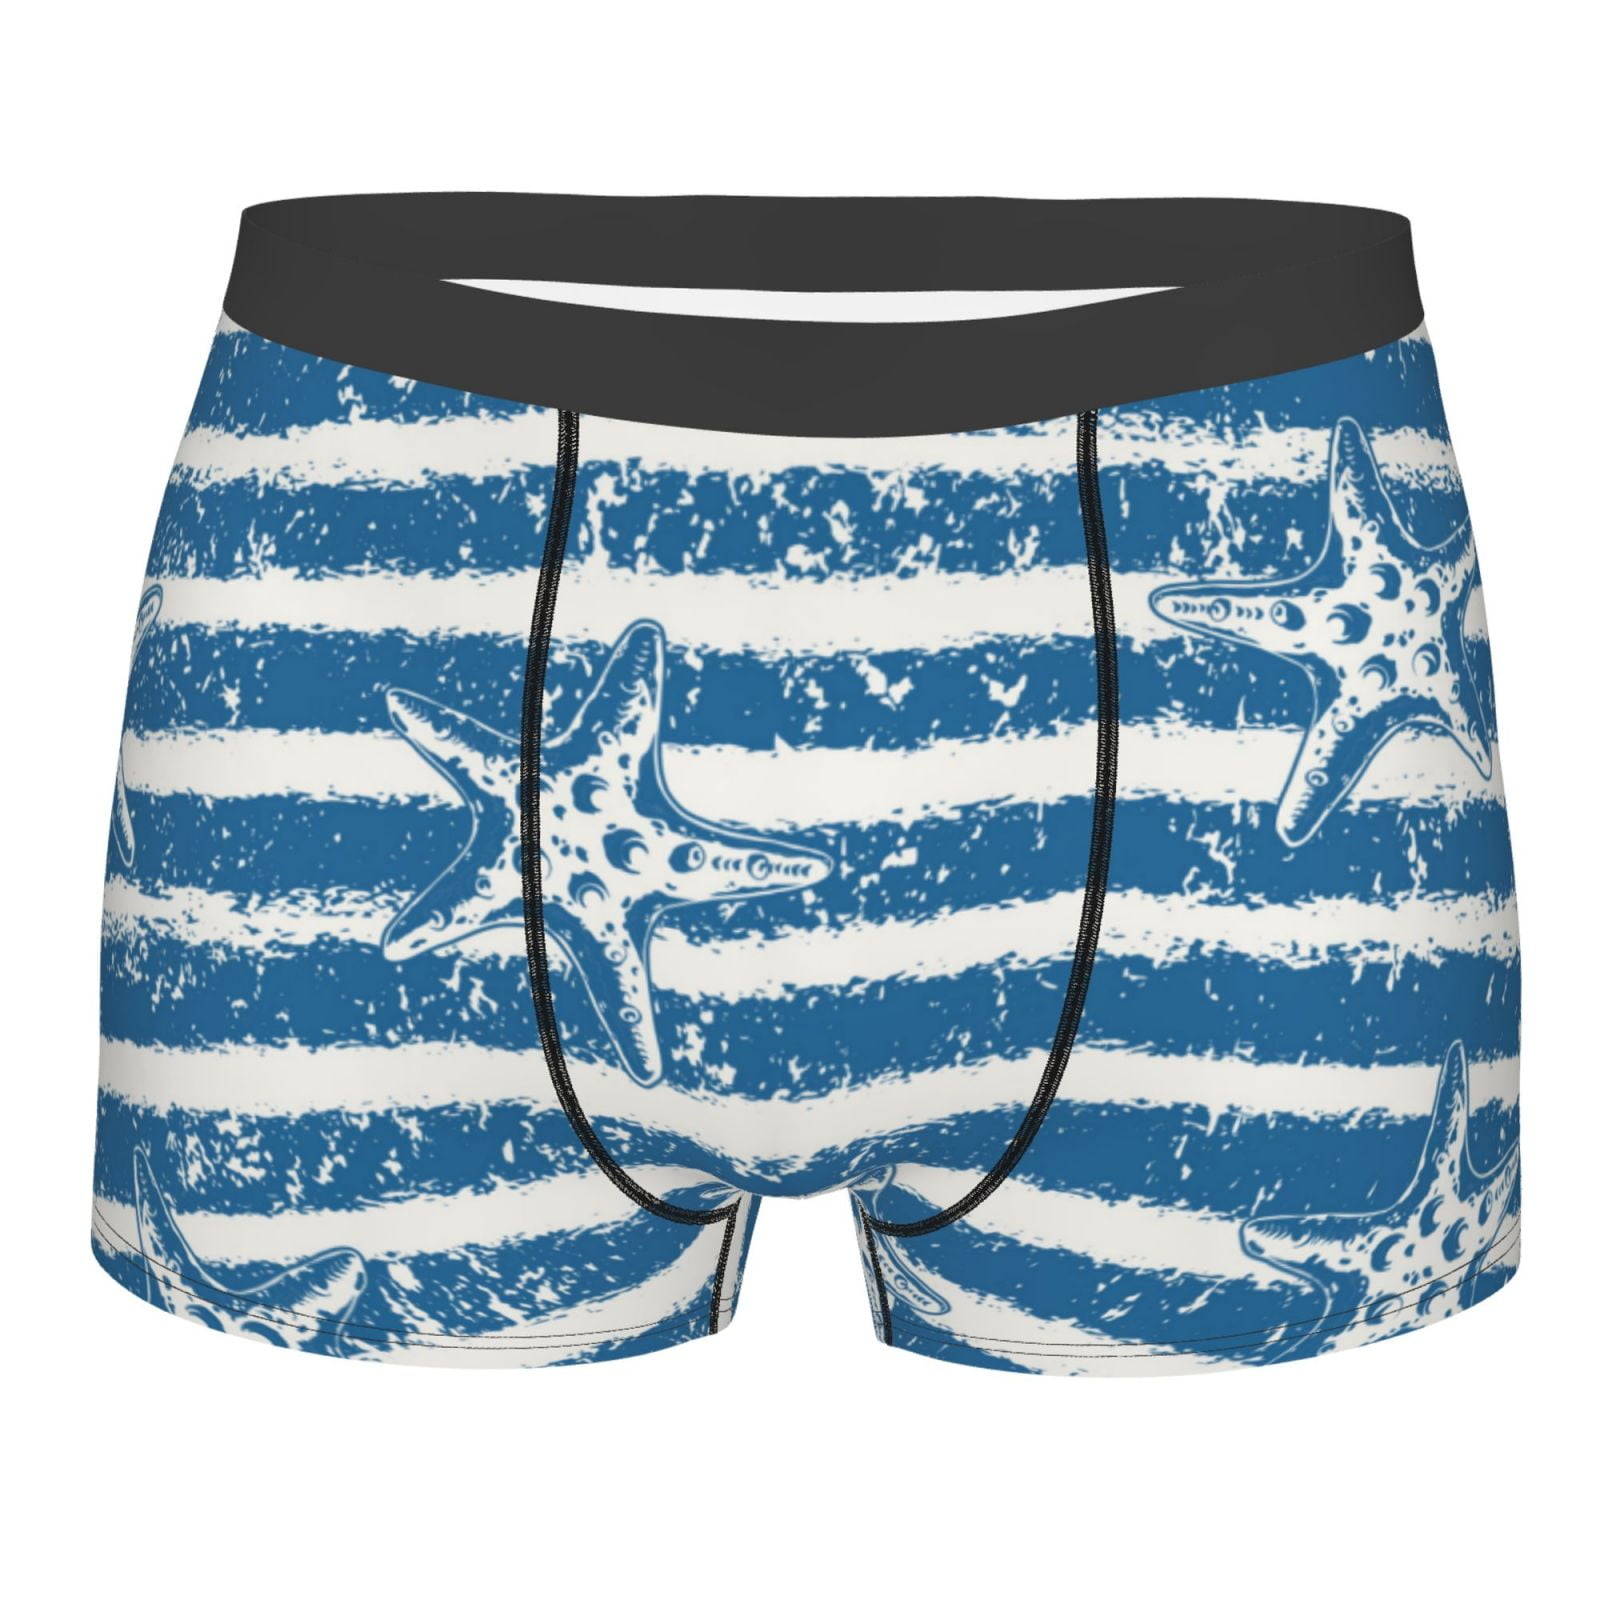 Adobk Men'S Ocean On Striped Boxer Briefs,Moisture Wicking & Breathable ...